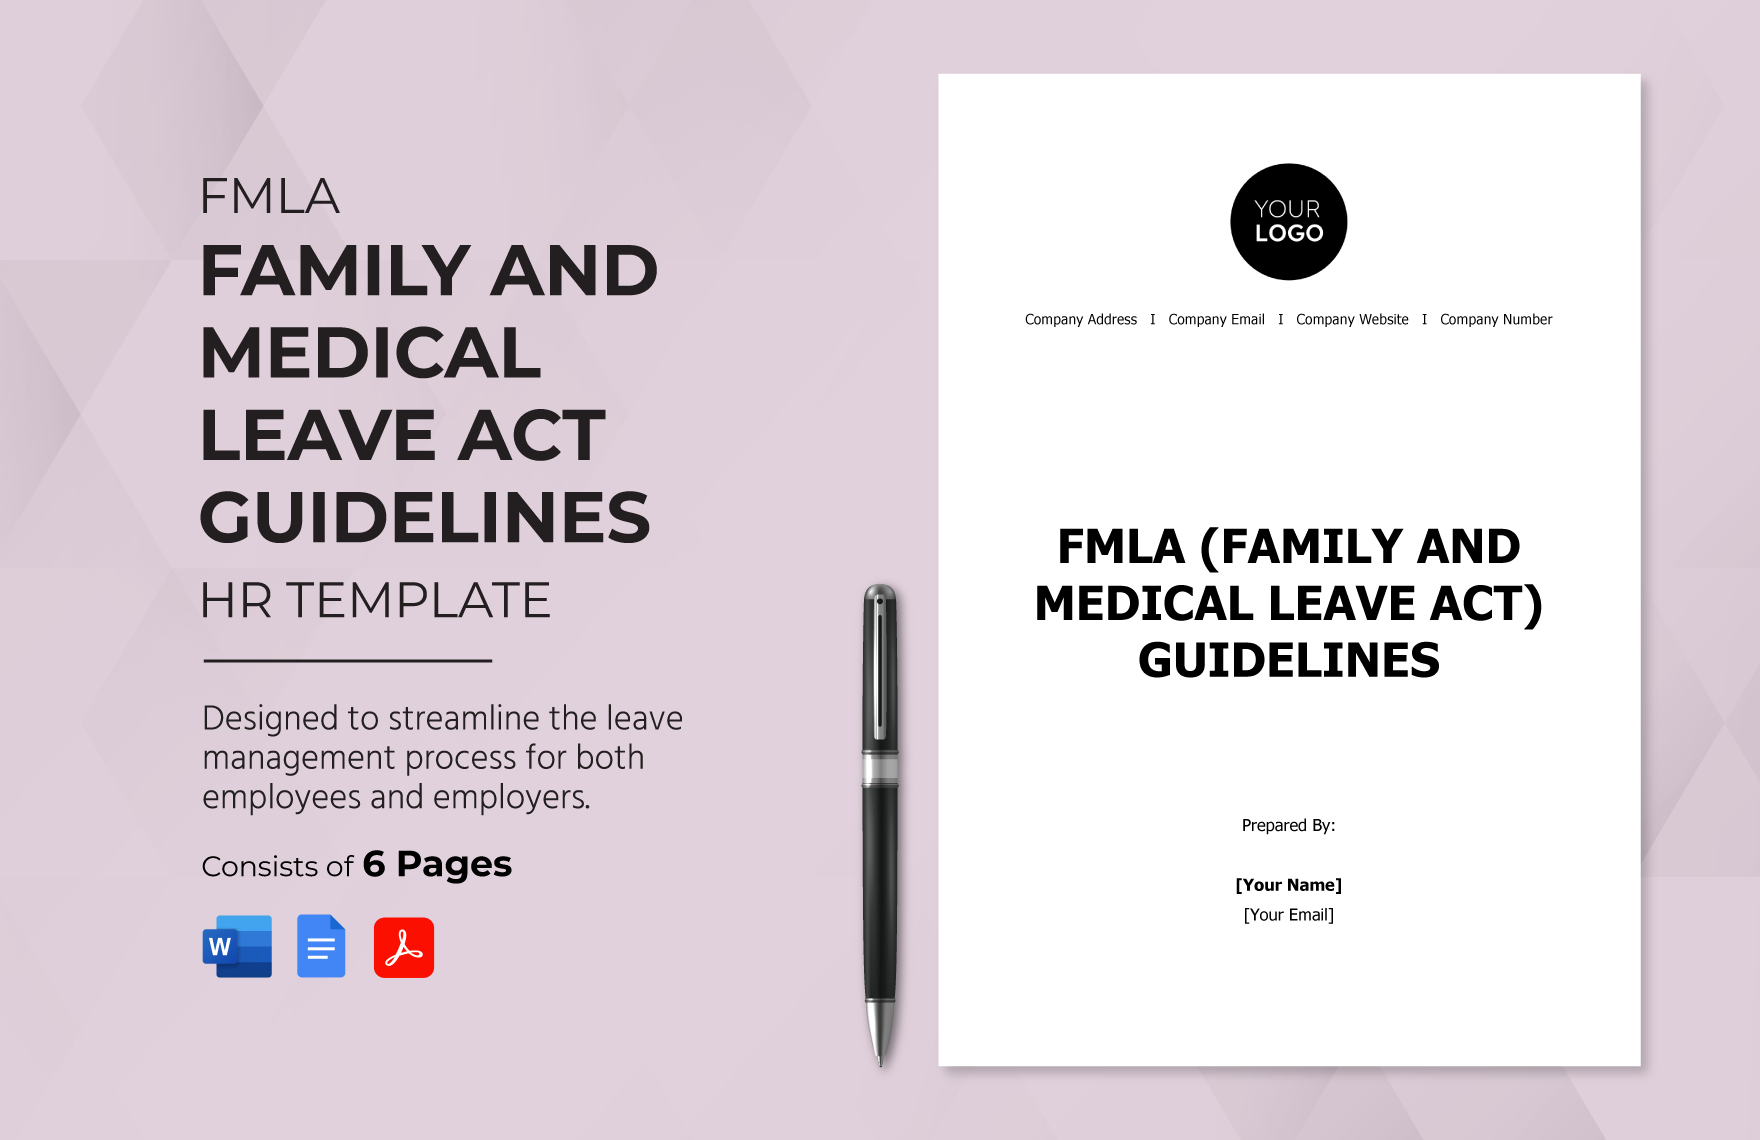 FMLA (Family and Medical Leave Act) Guidelines HR Template